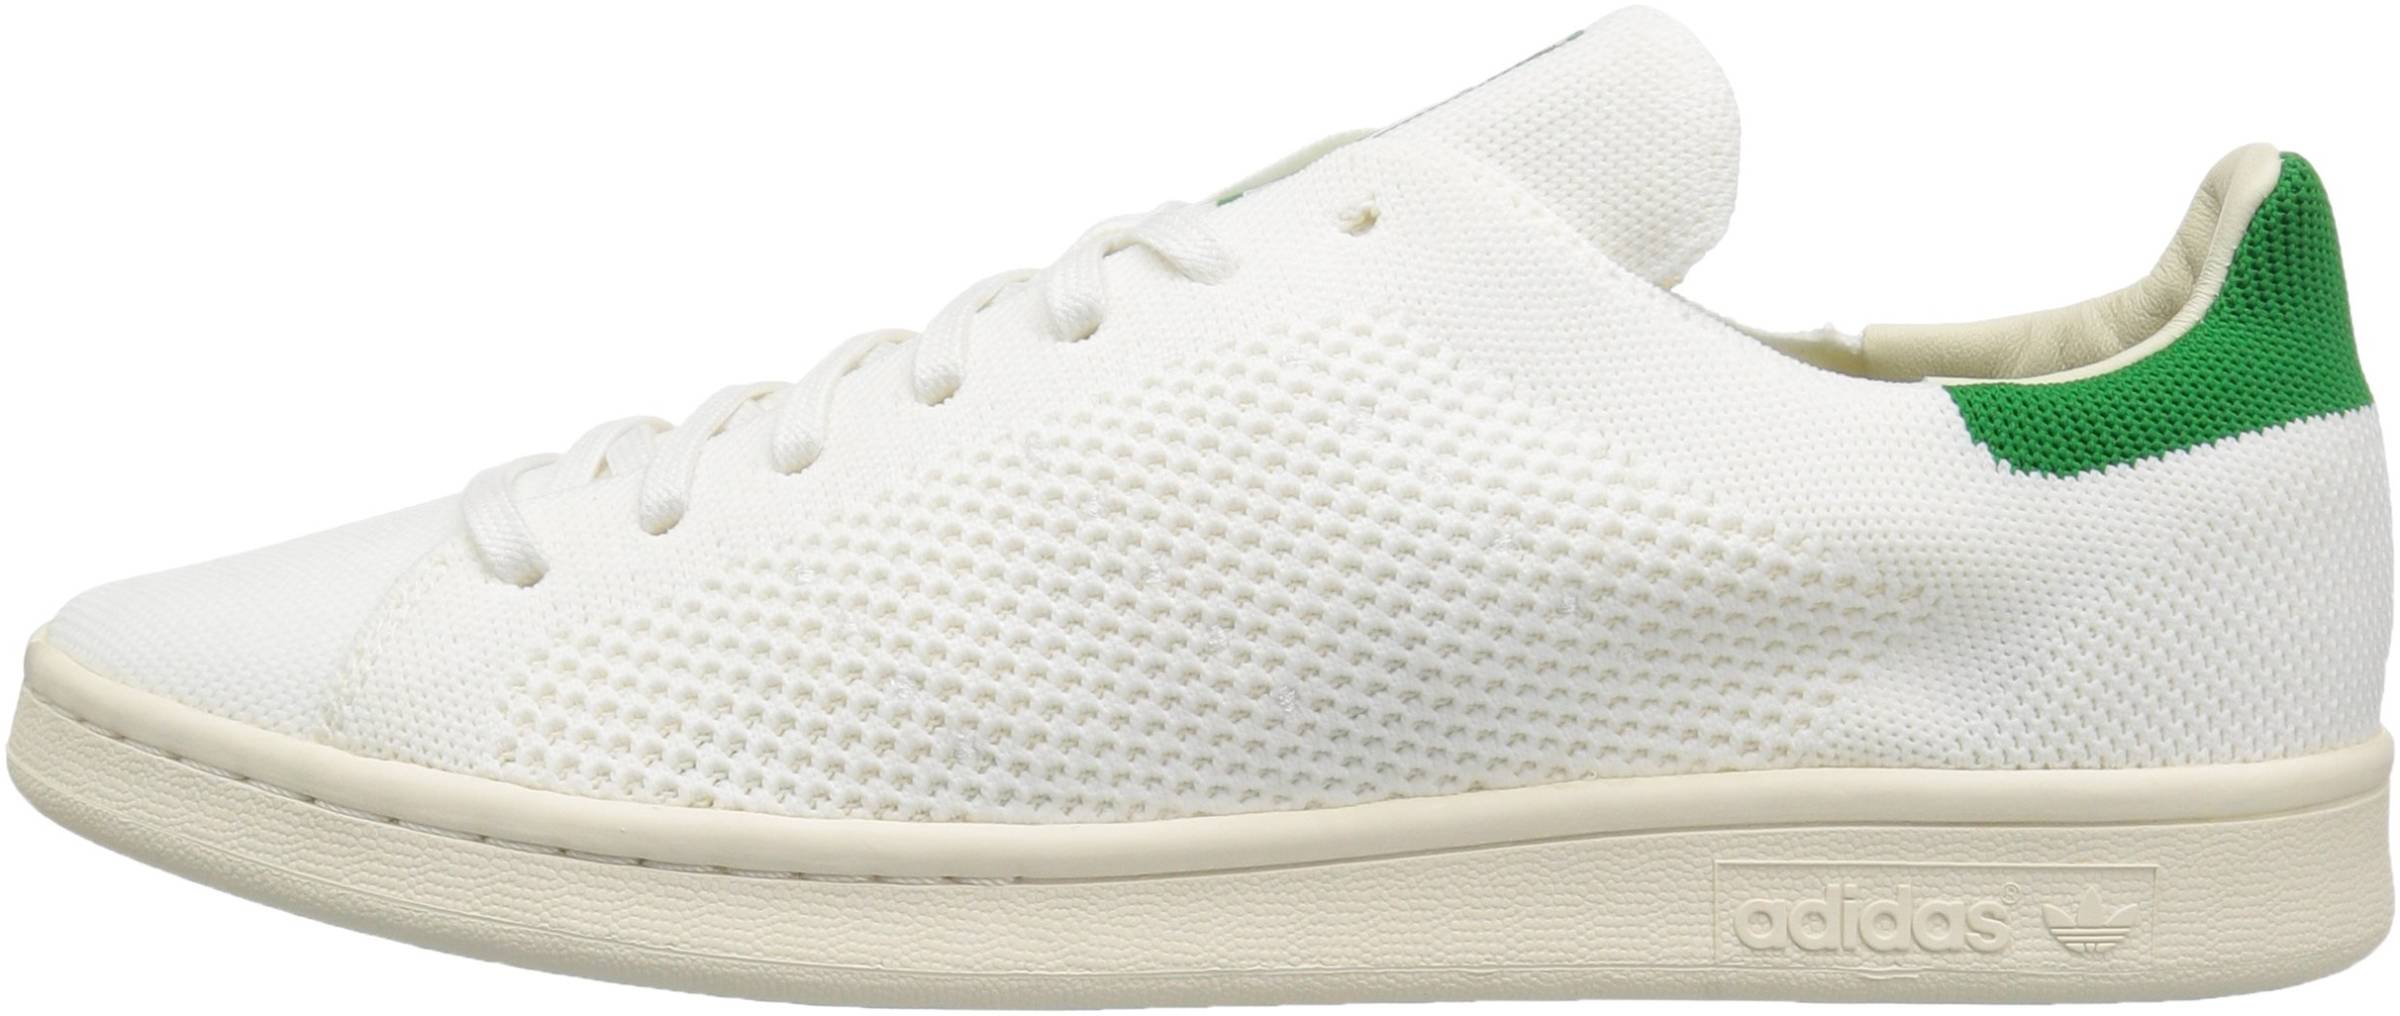 Janice lips Fighter Adidas Stan Smith Primeknit sneakers in 8 colors (only $50) | RunRepeat